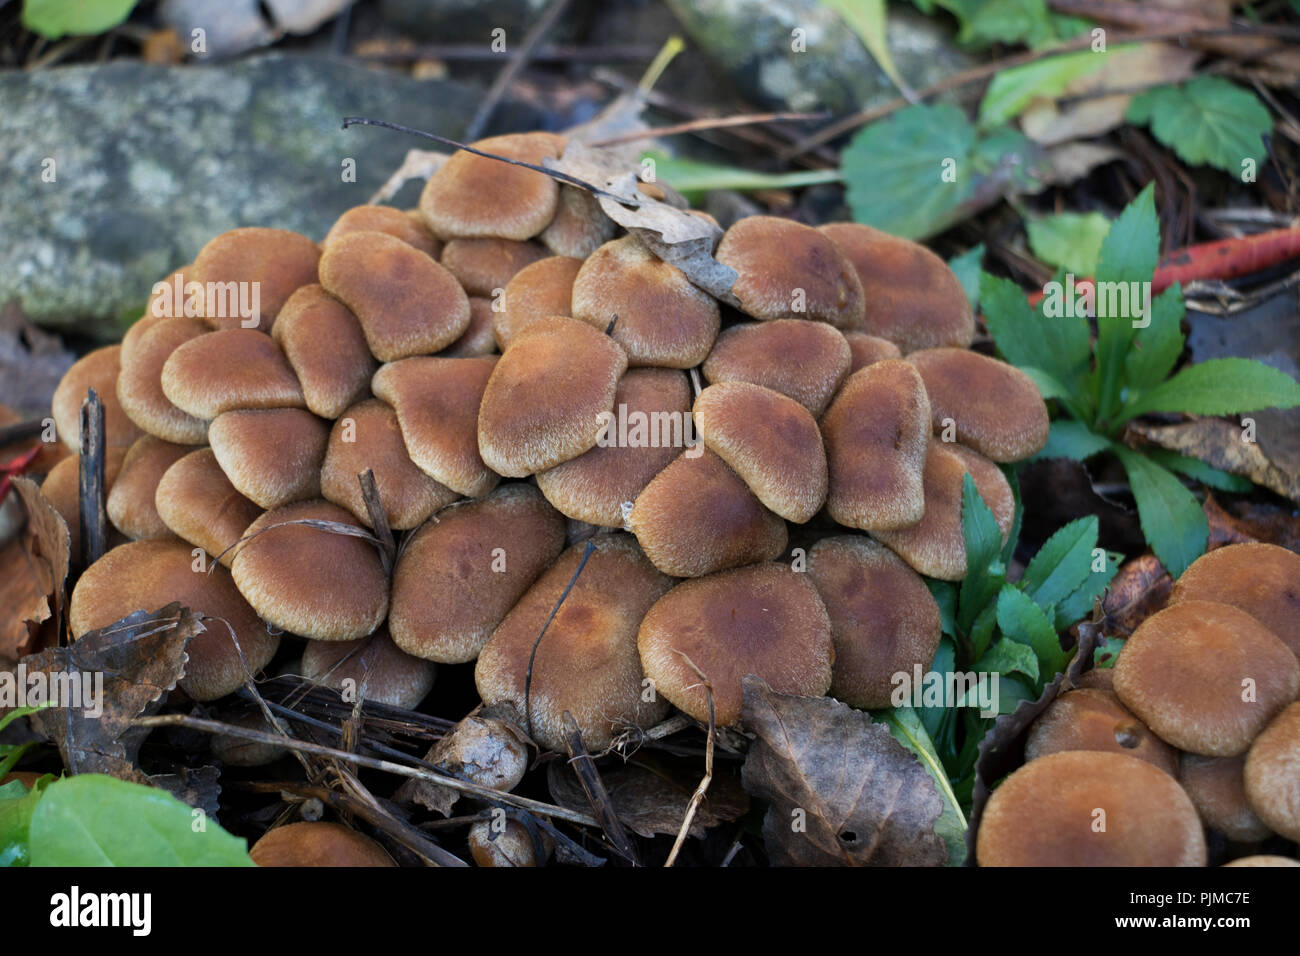 Grouping of furry mushrooms. Fruiting mushroom bodies found on the forest floor. Stock Photo